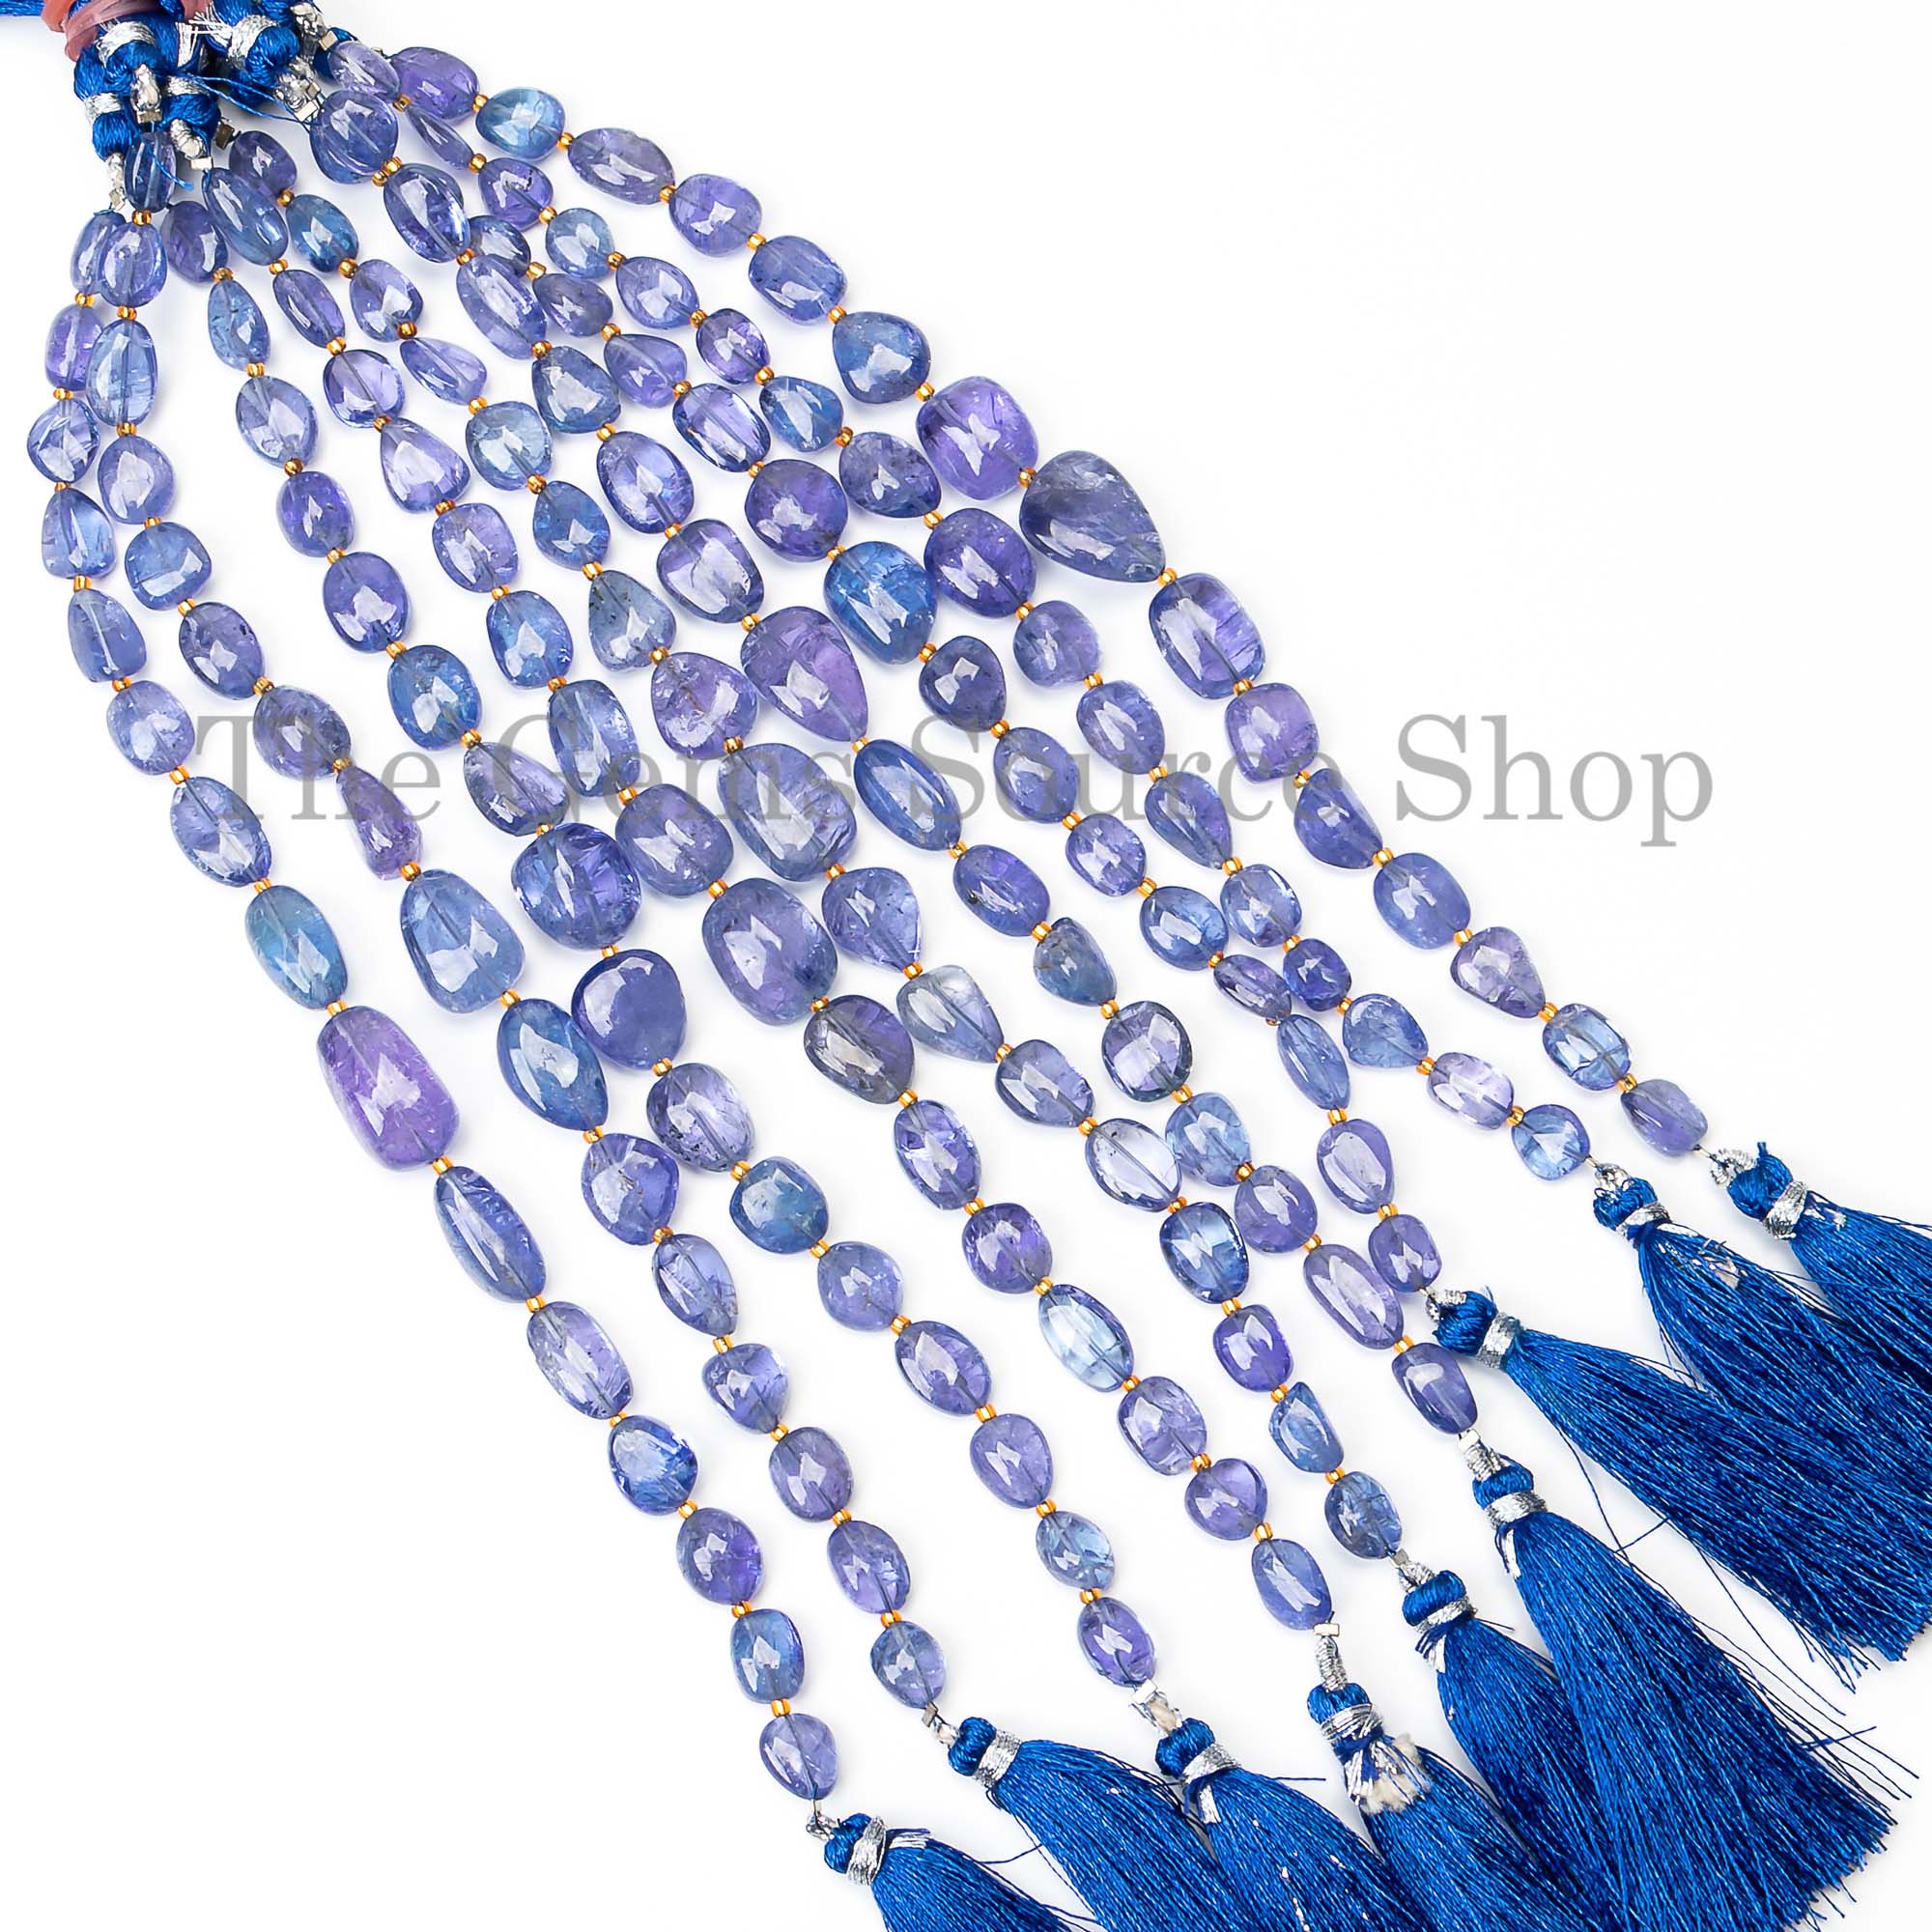 Top Quality Tanzanite Smooth Nugget Beads, Tanzanite Plain Nugget Beads, Natural Tanzanite Beads